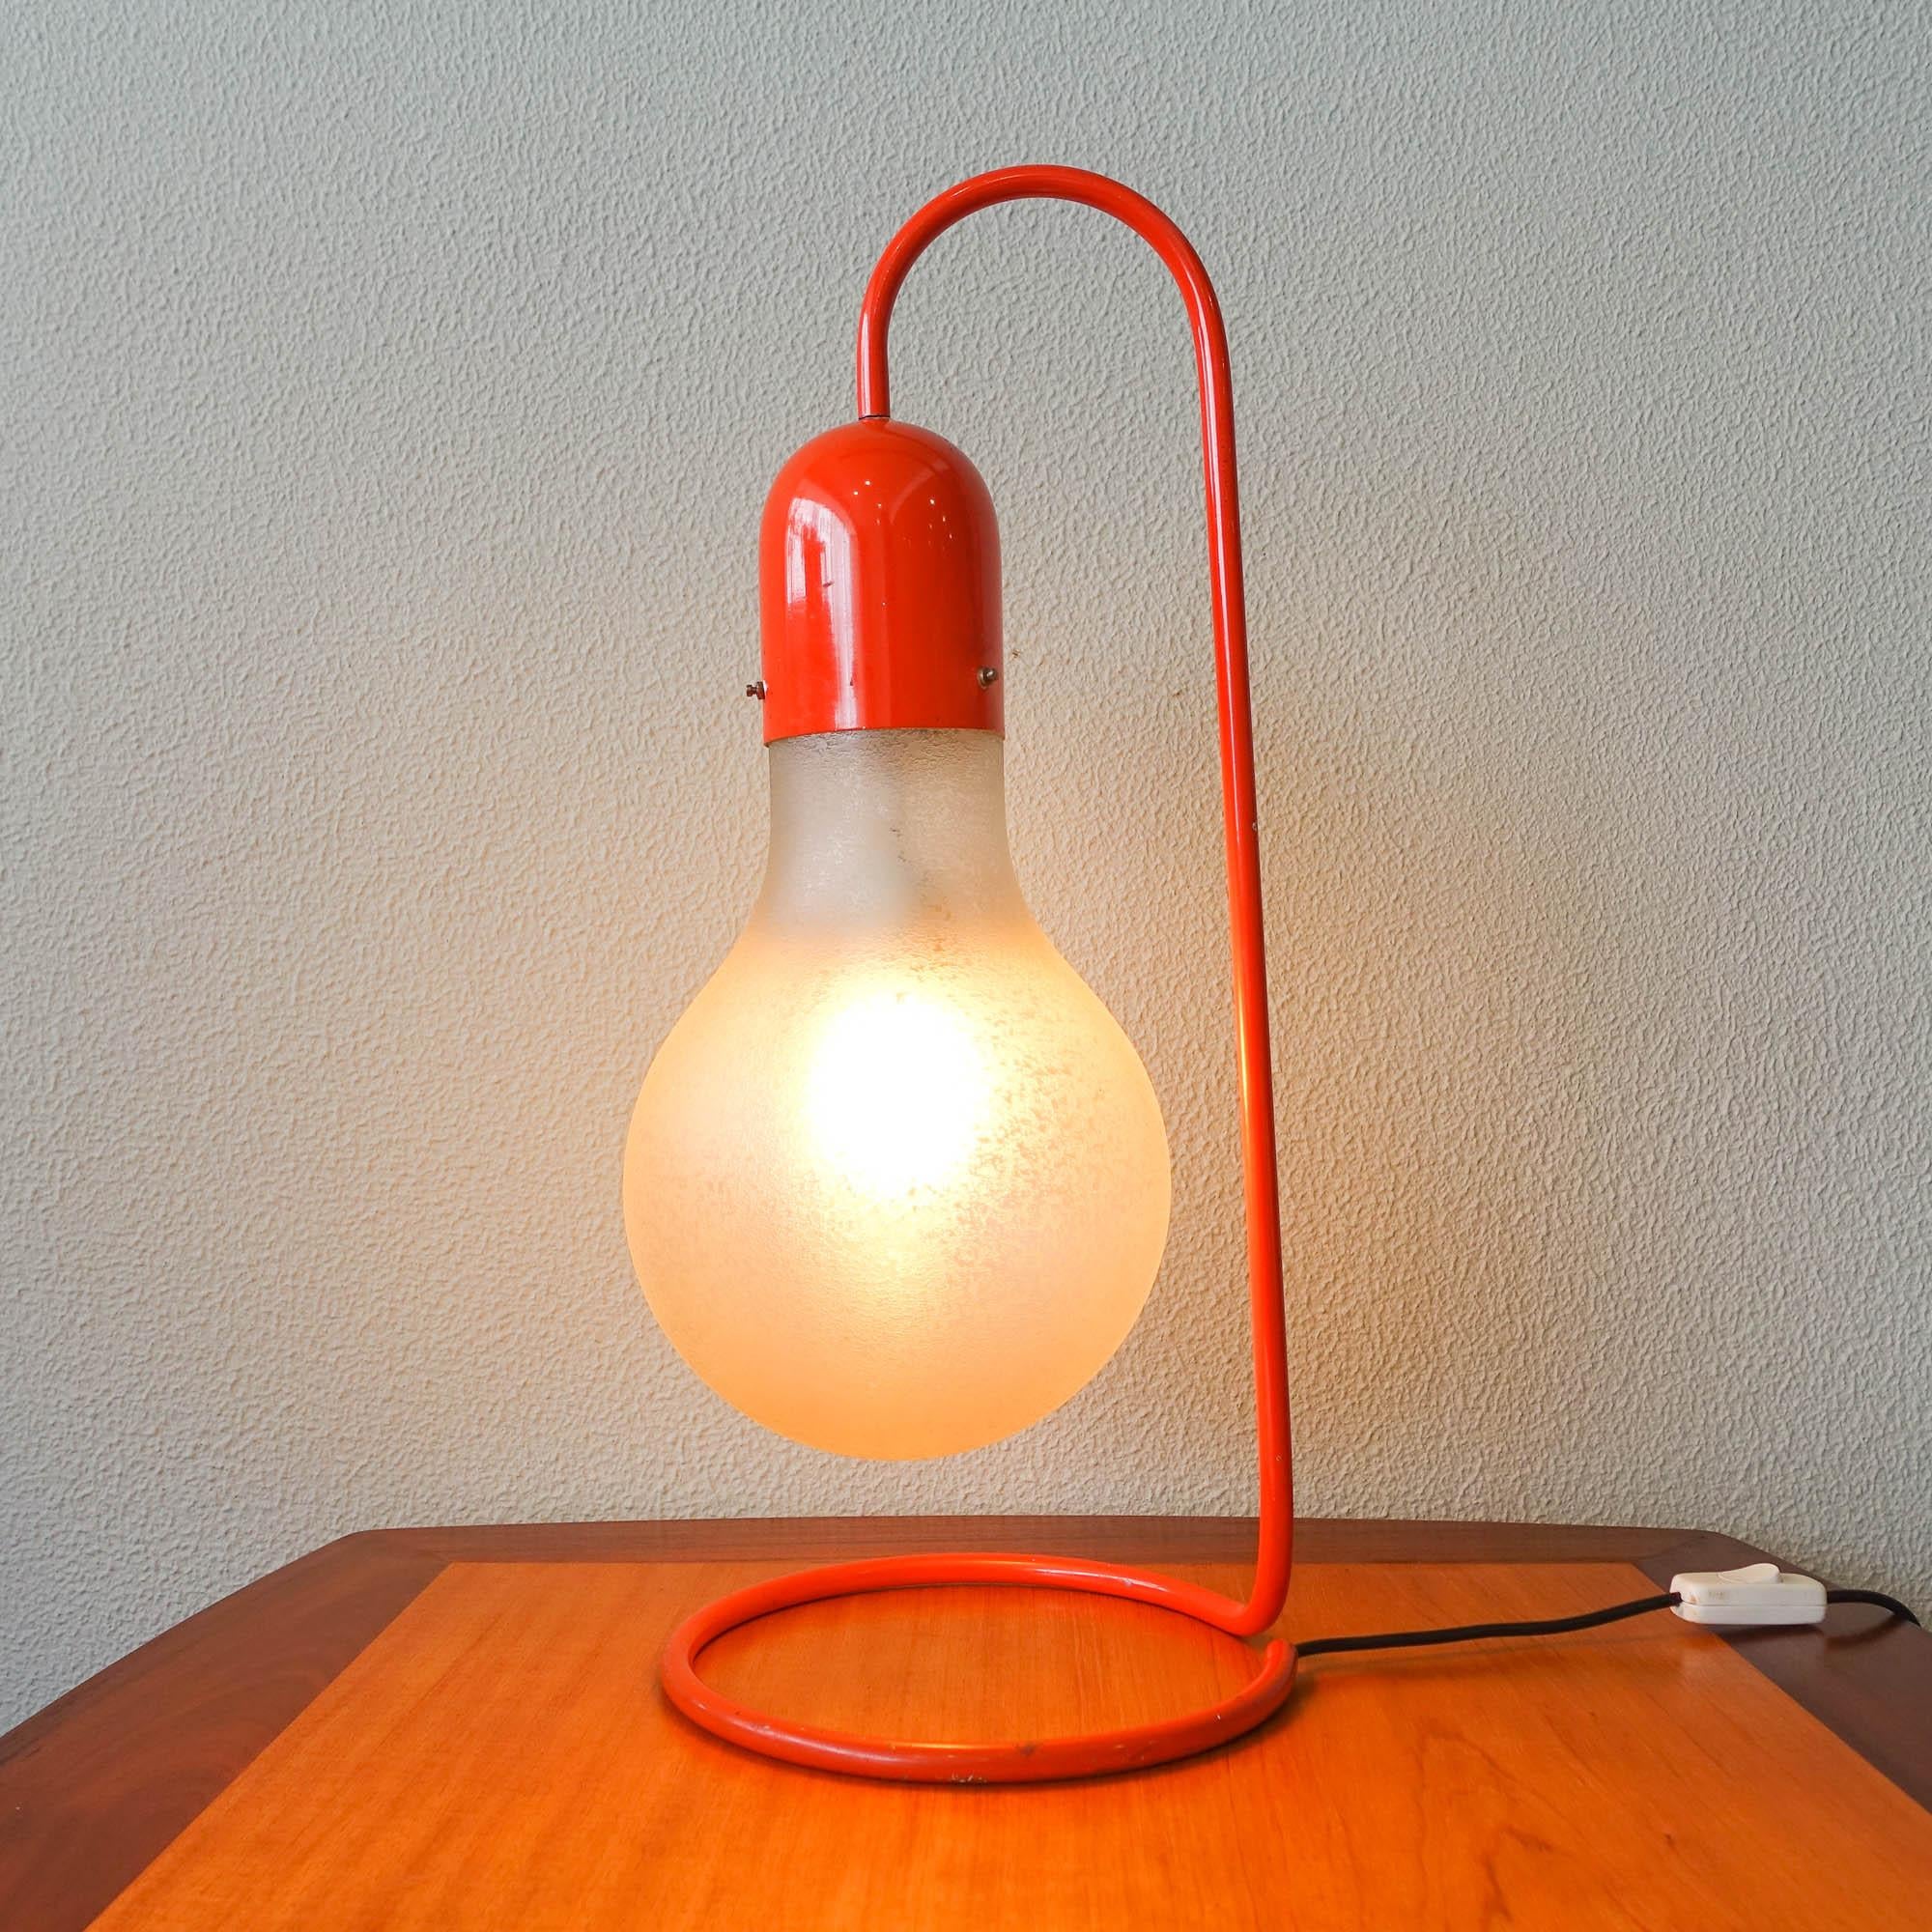 This table lamp was designed and manufactured by Stilux Milano, in Italy, during the 1970's. It features a red frame and a blown glass shade shaped as a light bulb. In original and good vintage condition.